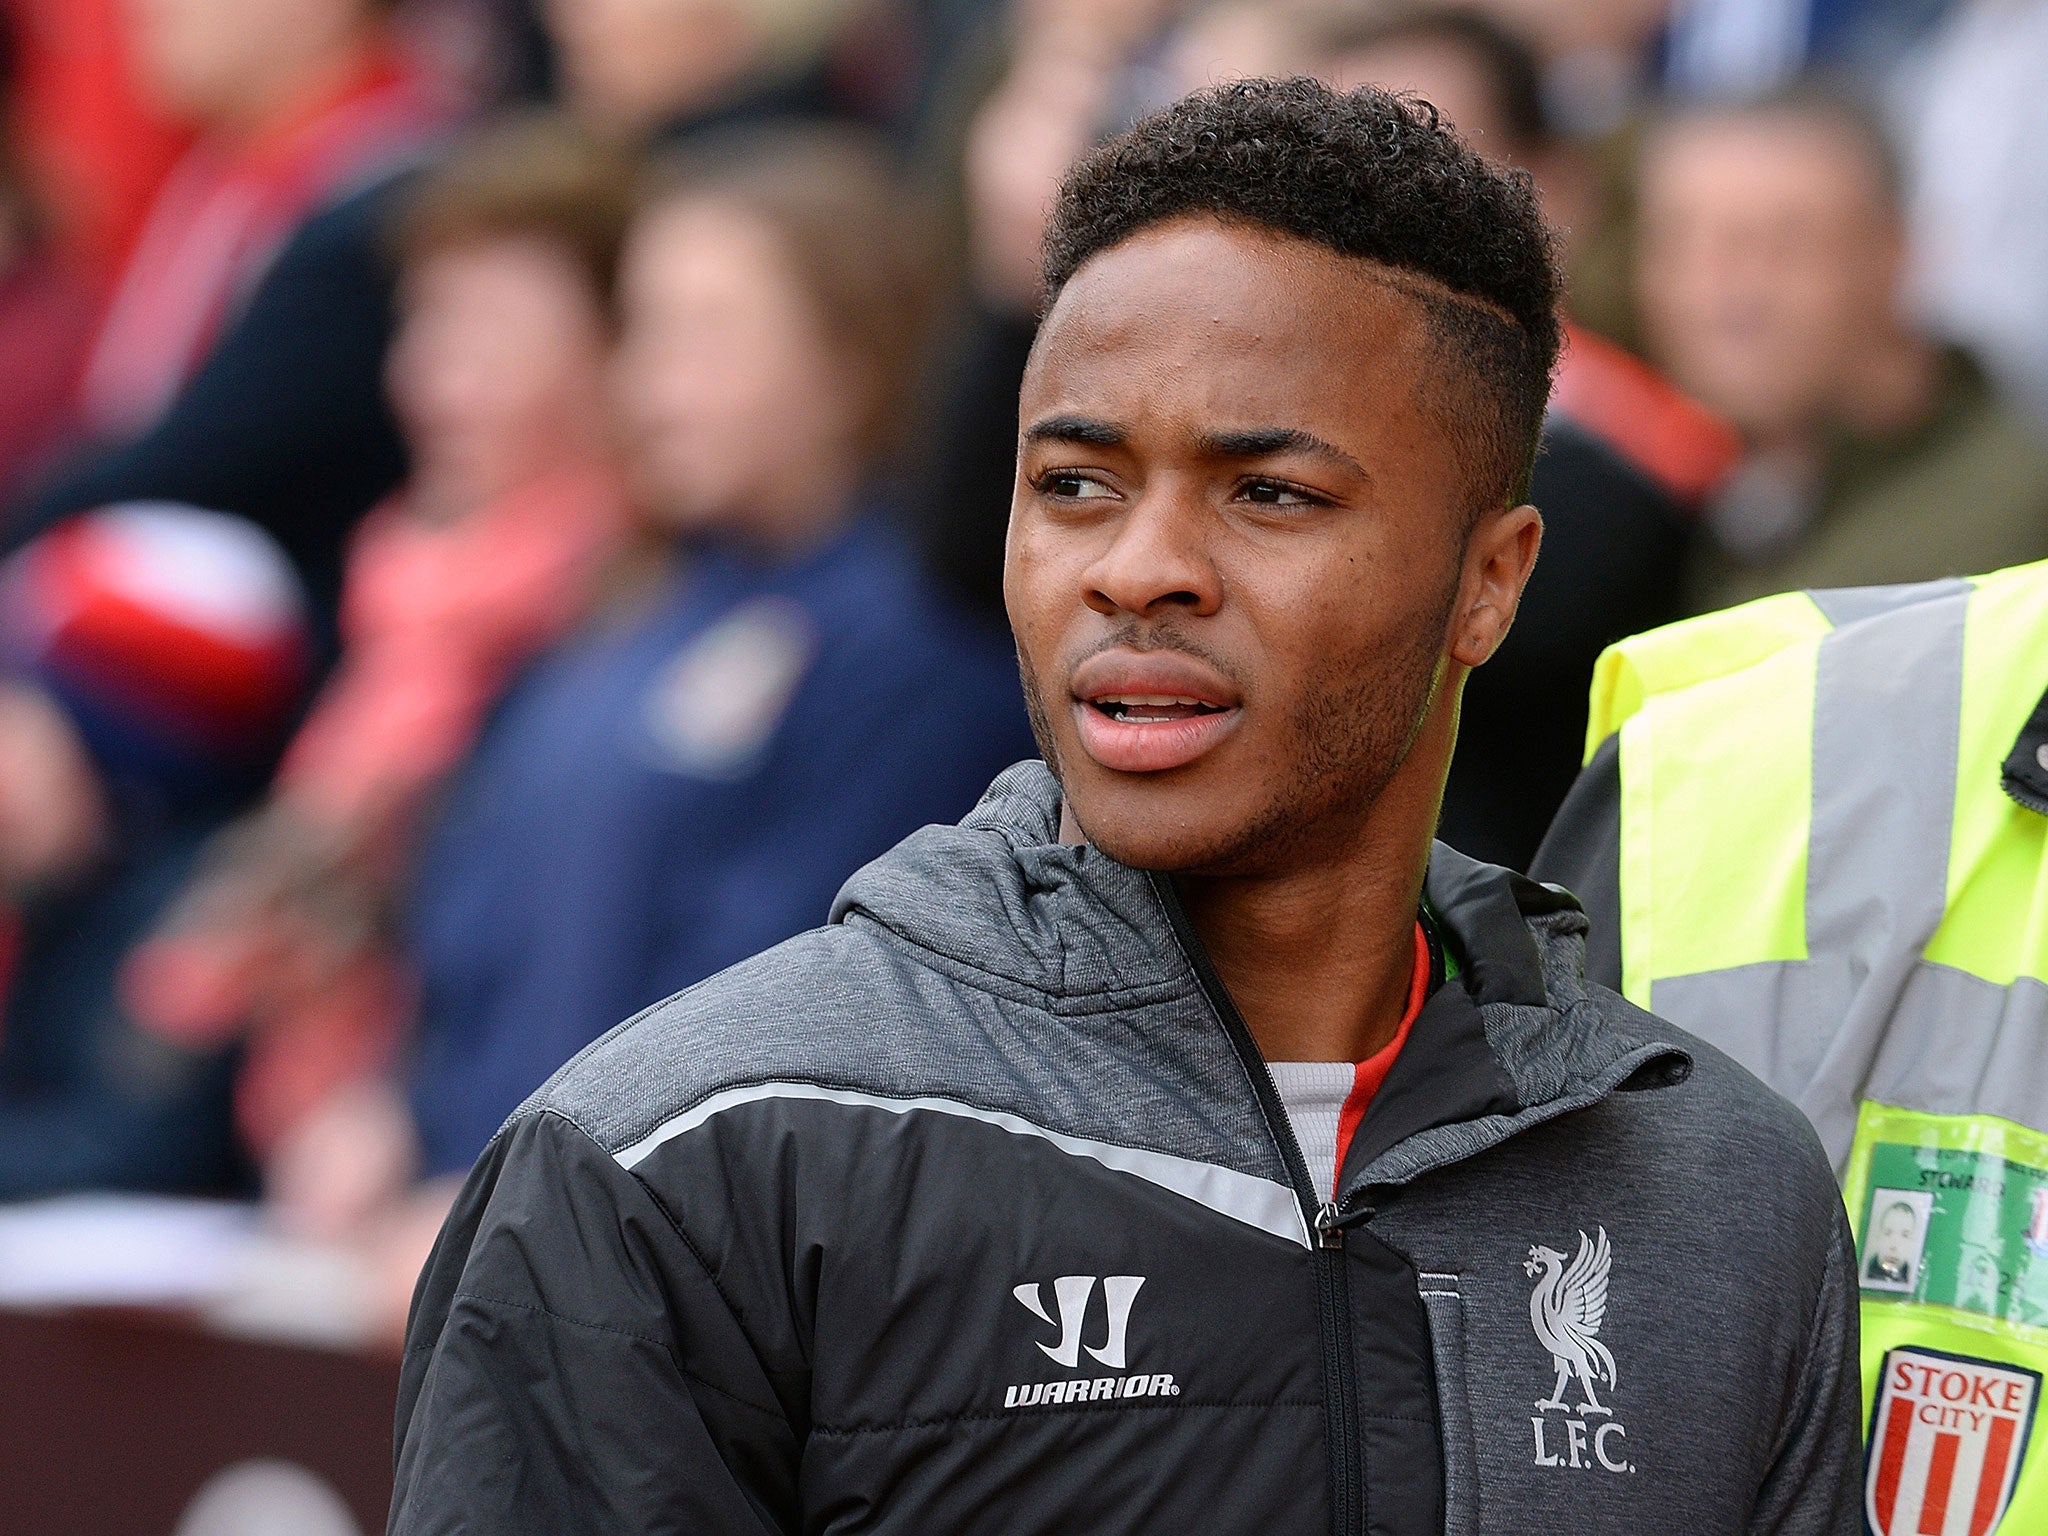 Manchester City are unwilling to meet Sterling’s £50 million price tag